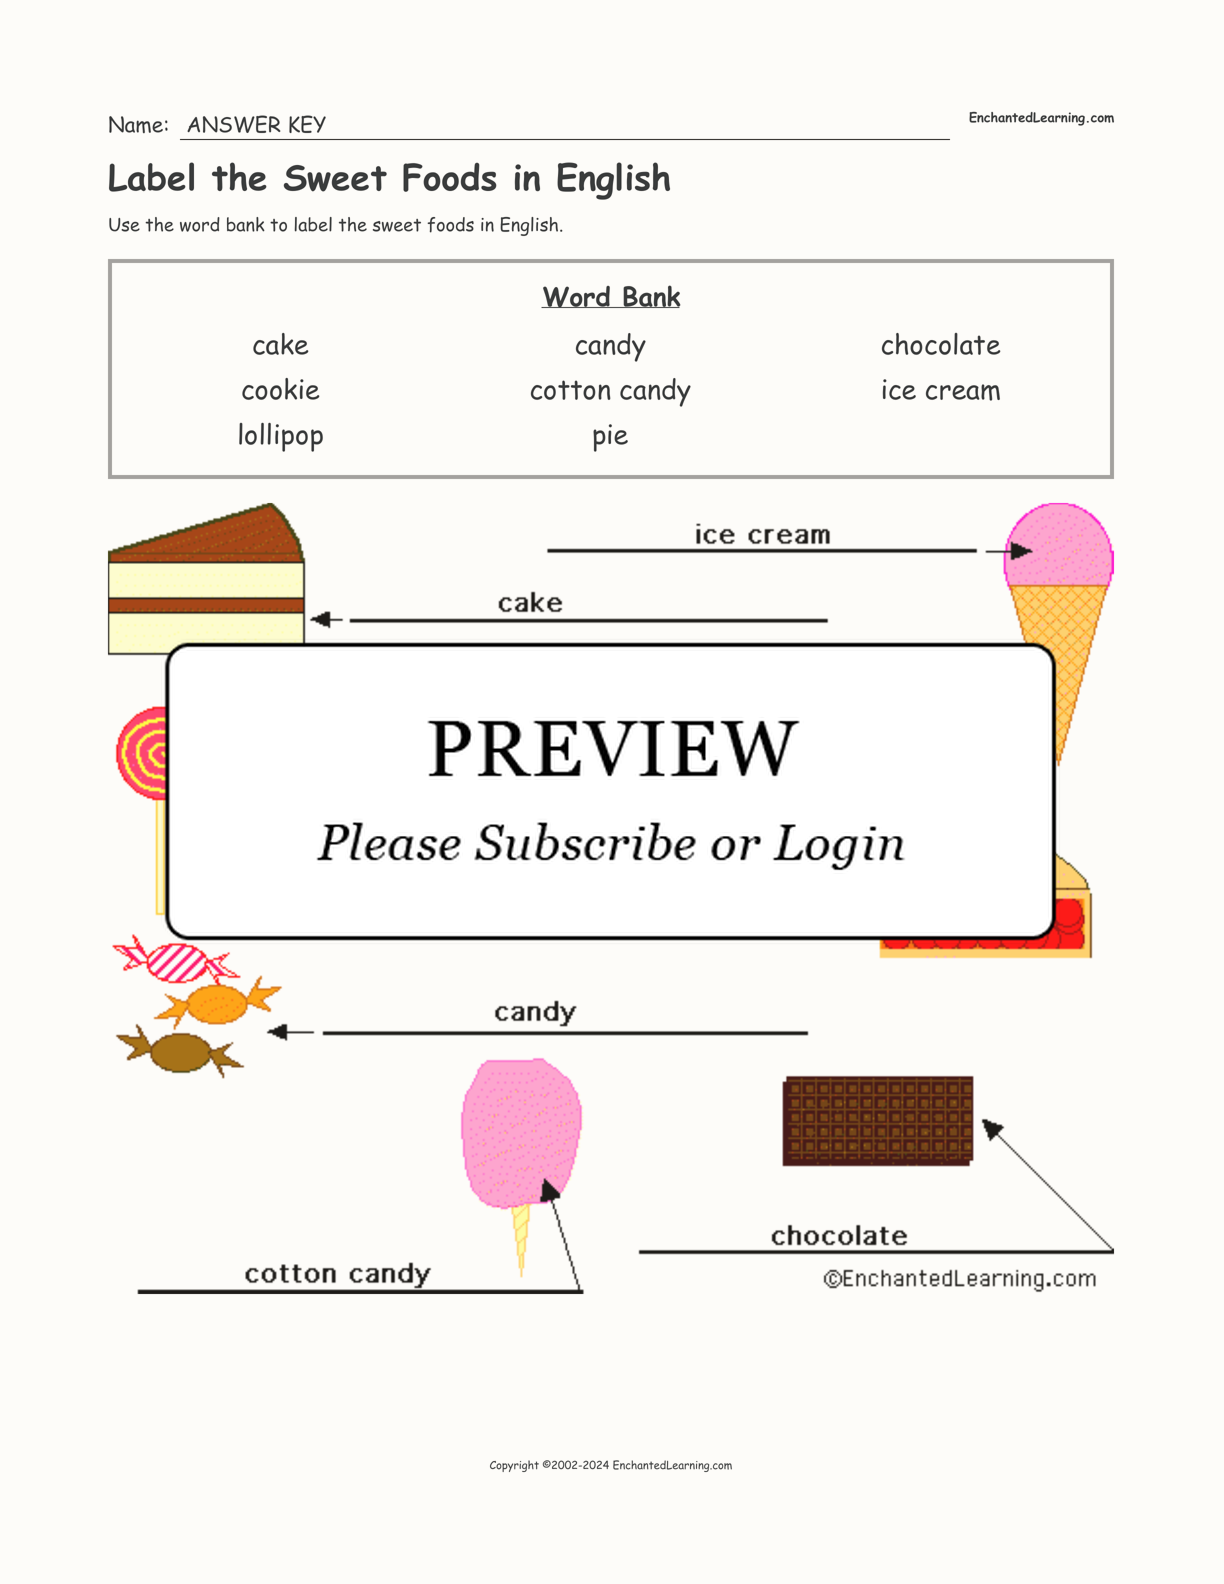 Label the Sweet Foods in English interactive worksheet page 2